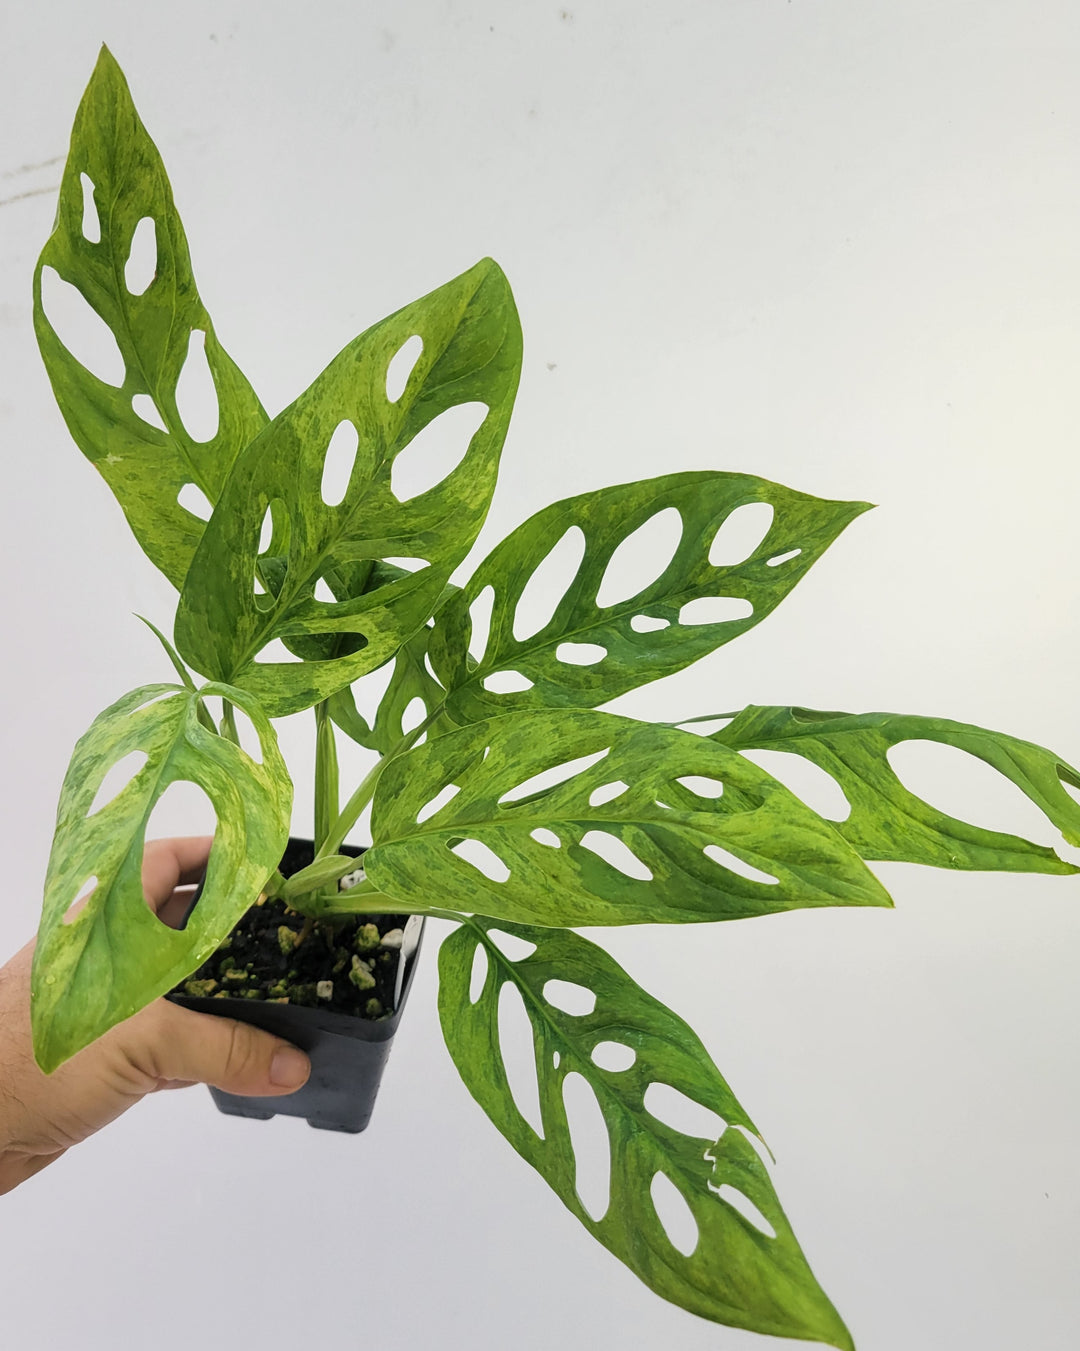 Variegated Monatera Adansonii Mint very Large! variegated swiss cheese plant, easy tropical plant US seller, #F6